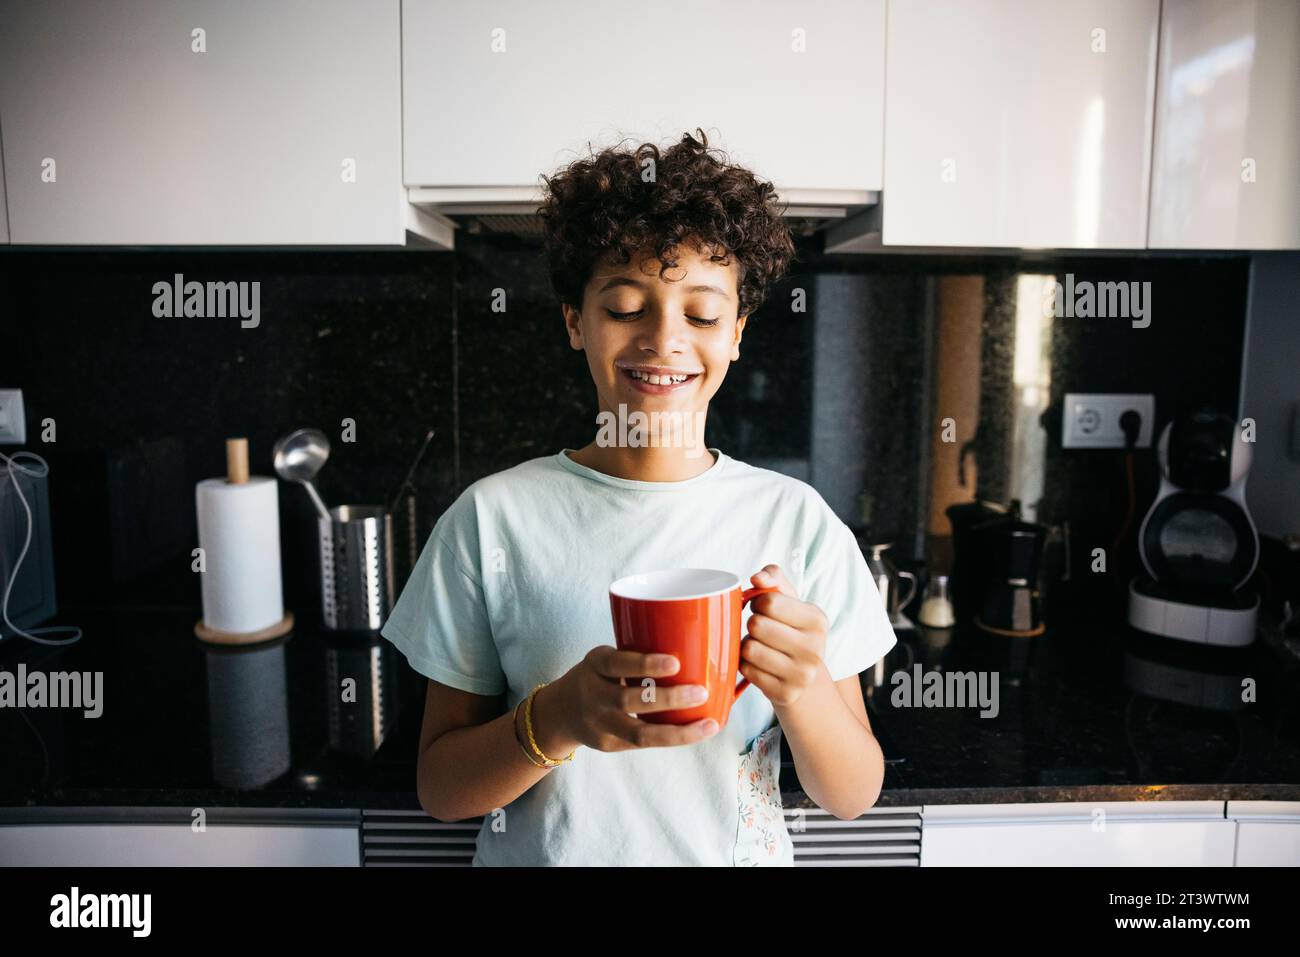 Smiling ten years old girl drinking milk from a red mug in the kitchen. Girl at home drinking a cup of milk. Stock Photo